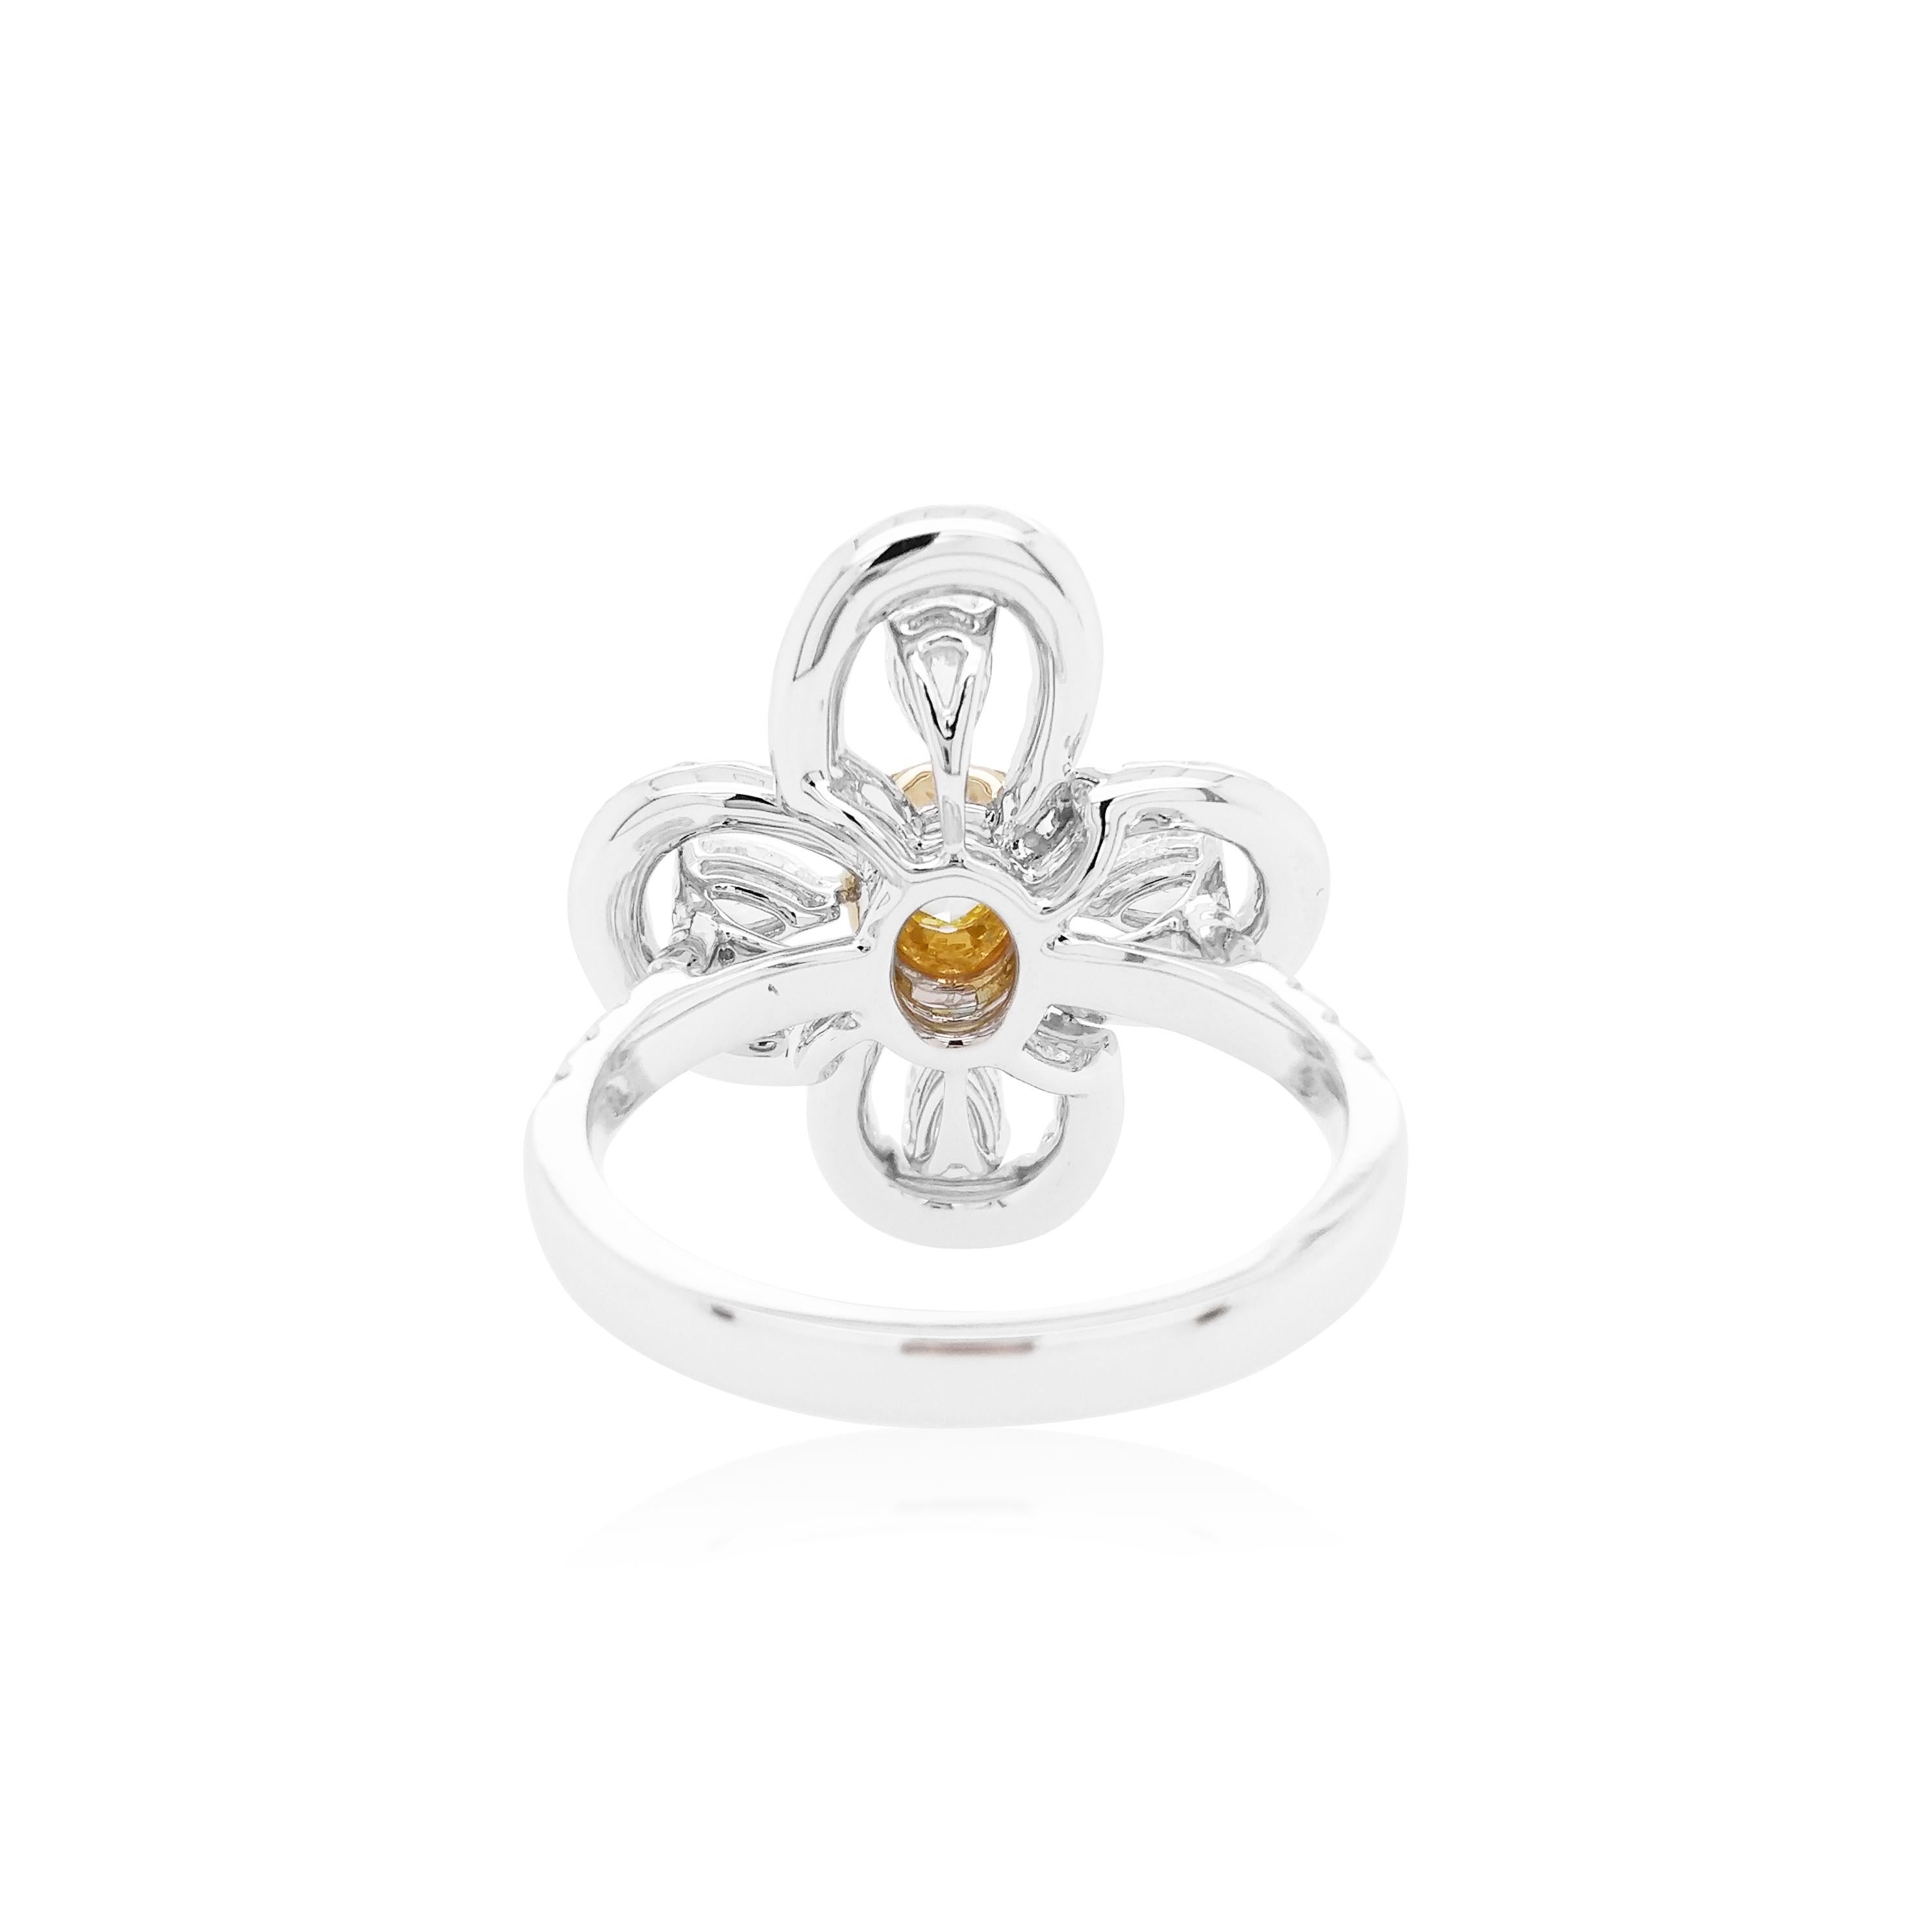 This timeless 18K gold ring features a lustrous Yellow diamond surrounded by small Yellow diamonds as a halo, and delicate arrangement of pear shape and round shape white diamonds. This ring is a contemporary classic and will make the perfect